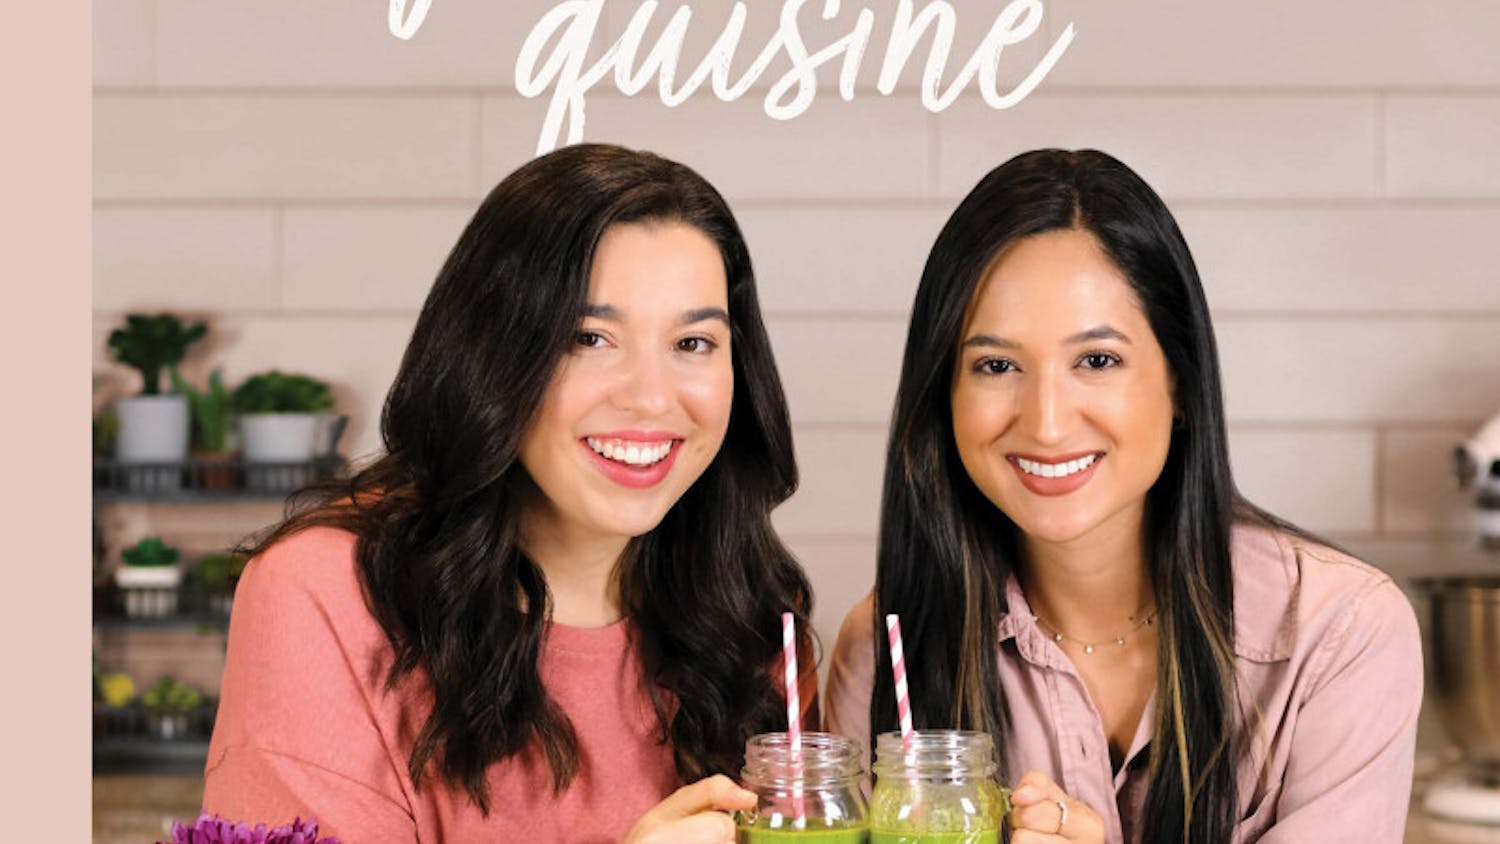 UF alumni Grace Ubben and Isabel Sanchez created a 2020-themed cookbook with "quarantine"-inspired recipes and positive eating in mind. 